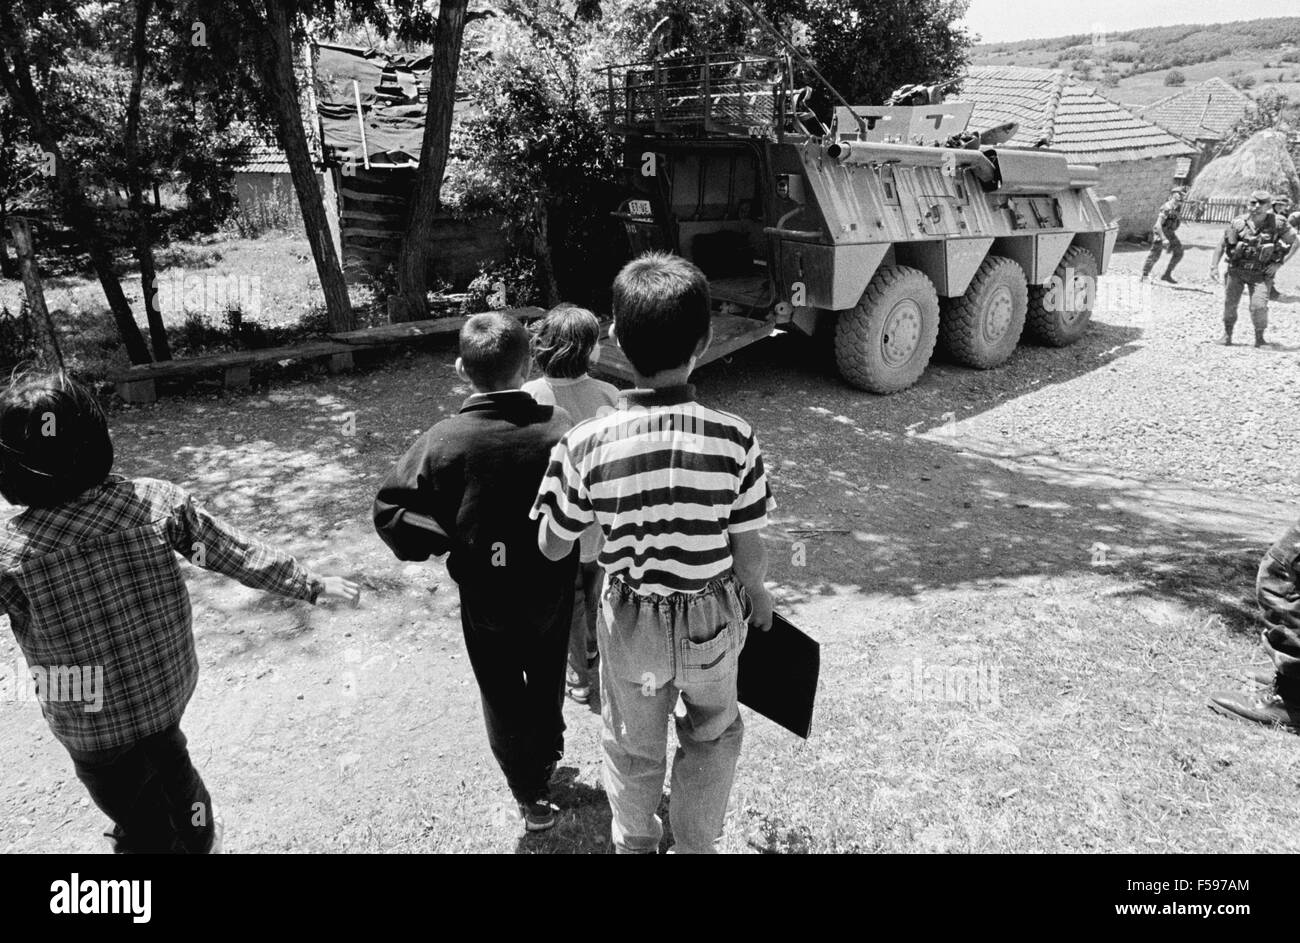 NATO intervention in Kosovo, July 2000, Spanish soldiers managing a school for Serbian children living in an Albanian area Stock Photo